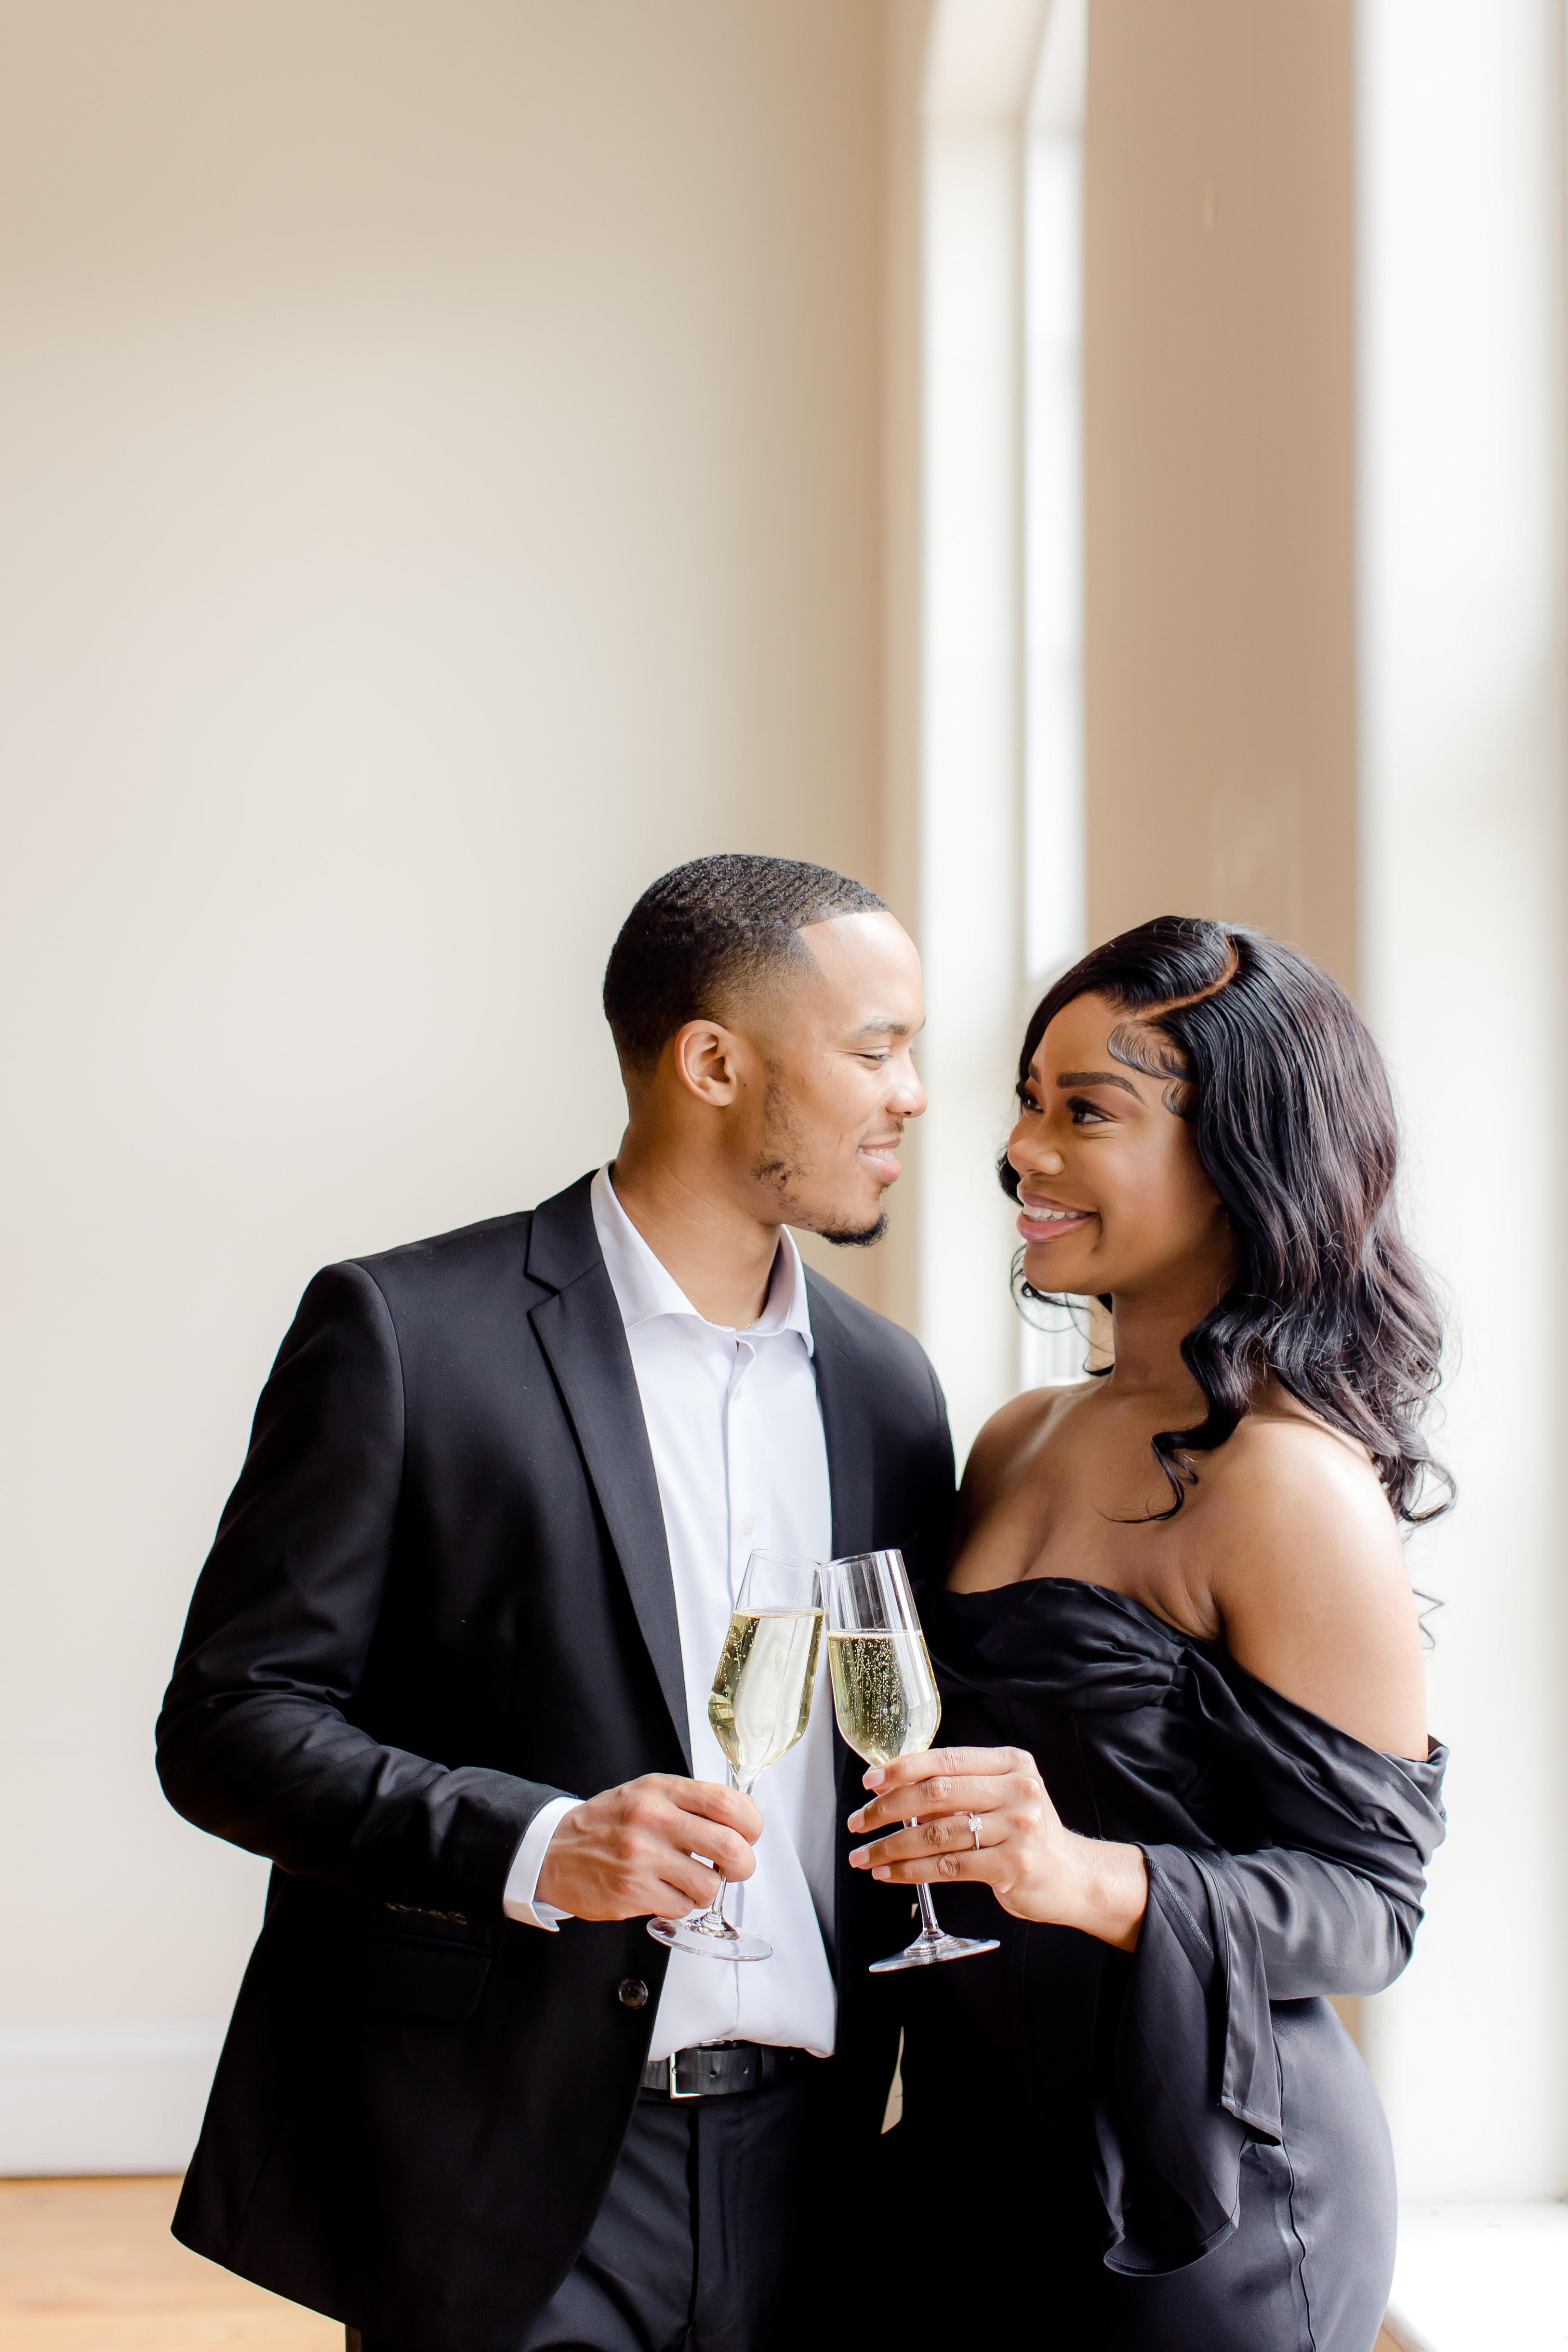 The Wedding Website of Blair Kennedy and Isaiah Cooks